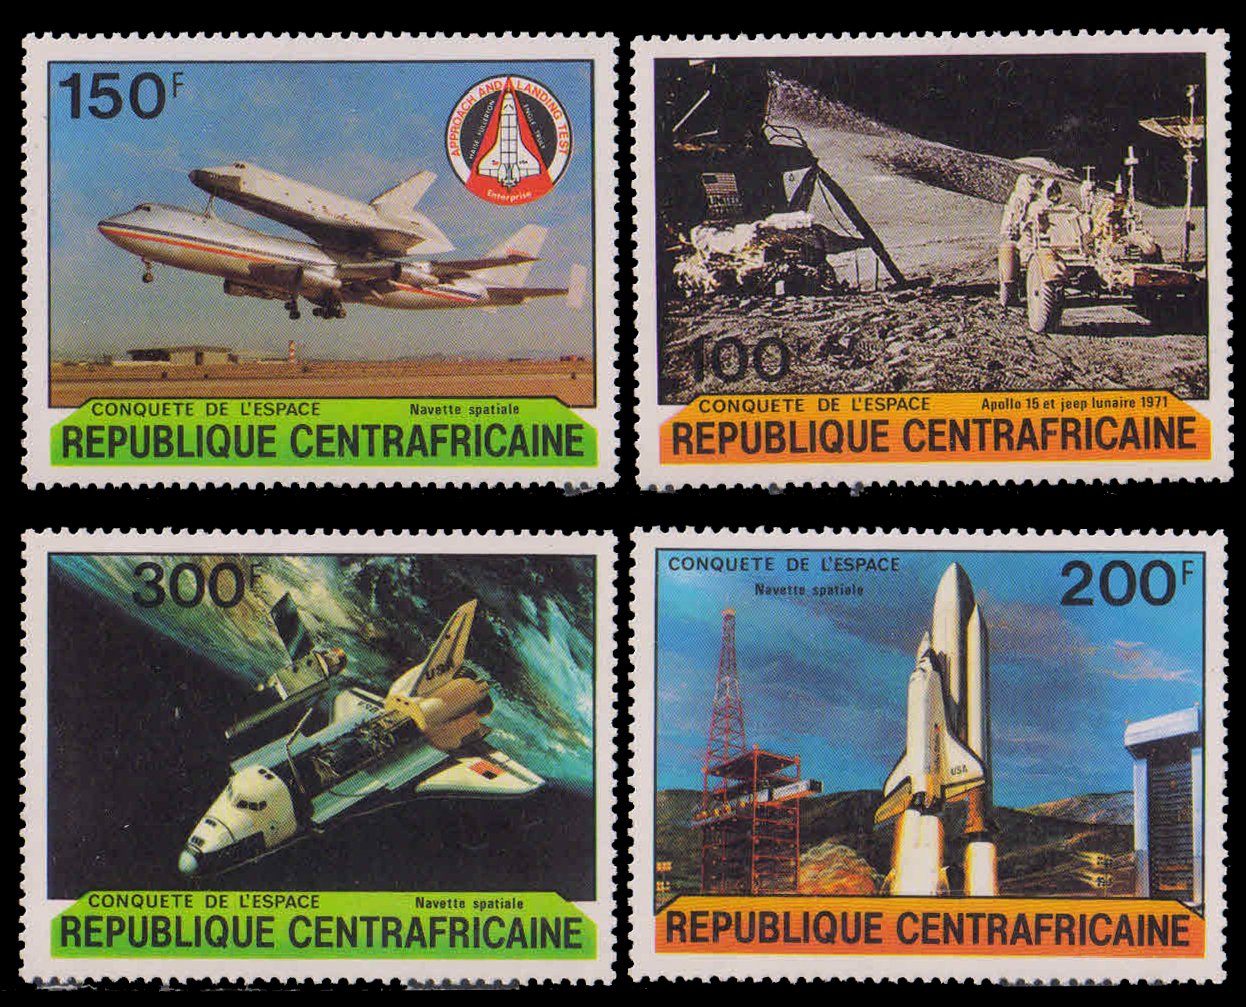 CENTRAL AFRICAN REPUBLIC 1981-Space Shuttle, Aircraft, Set of 4, MNH, S.G. 752-755-Cat � 6-